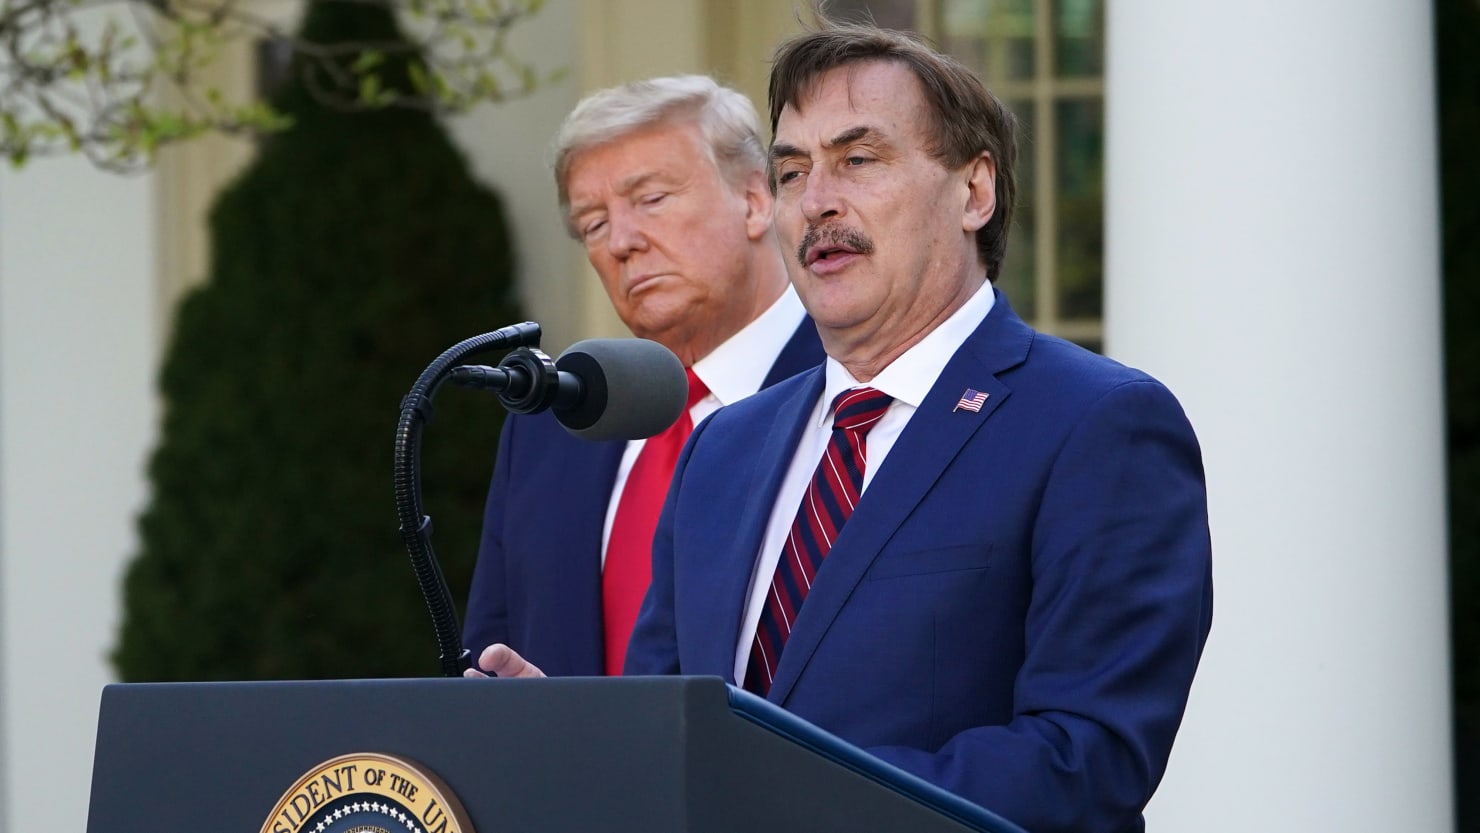 MyPillow CEO Mike Lindell hires Charles Harder to go after the Daily Mail for Jane Krakowski Affair Story